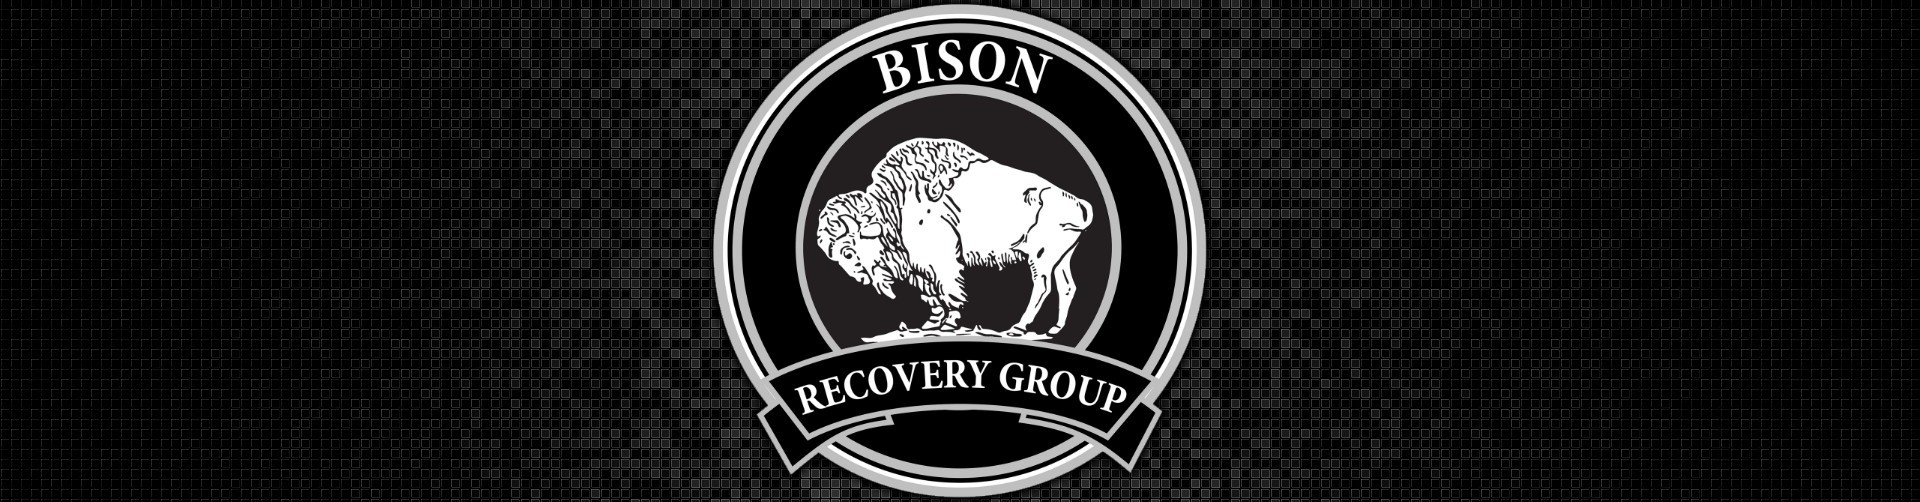 Bison Recovery Group